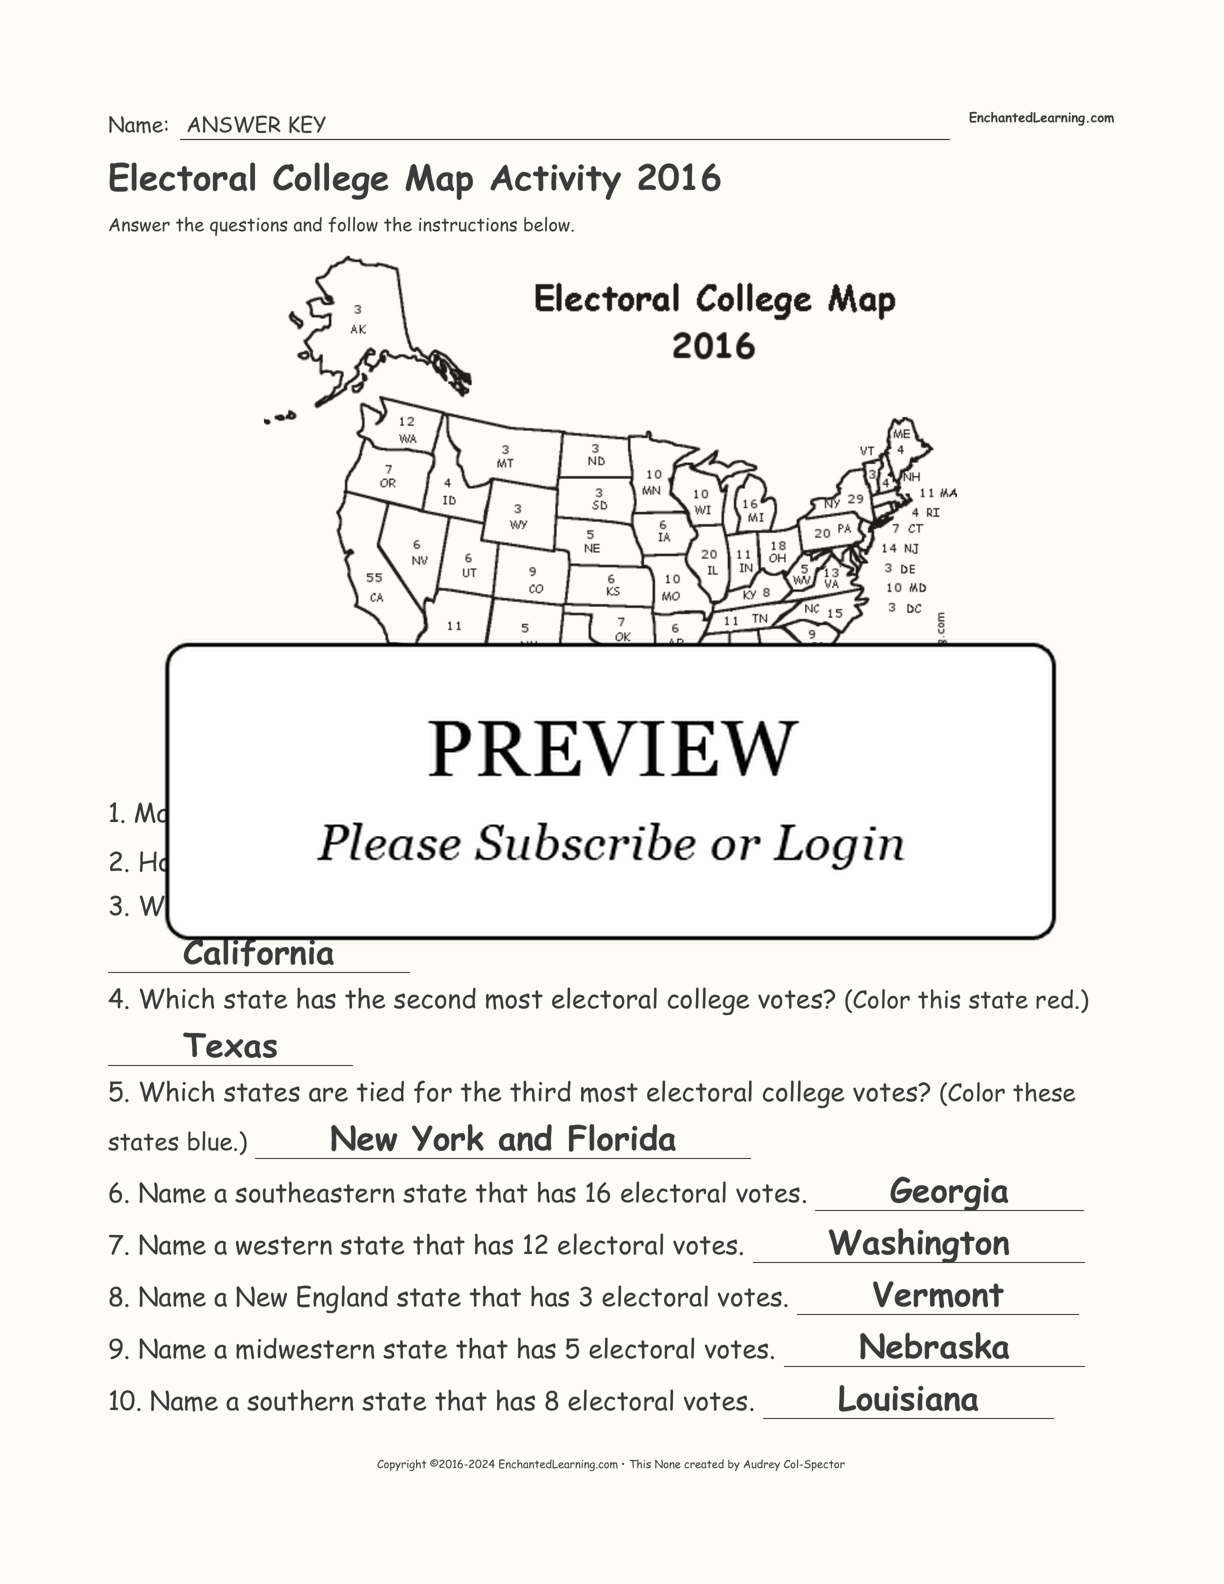 Electoral College Map Activity 2016 interactive worksheet page 2